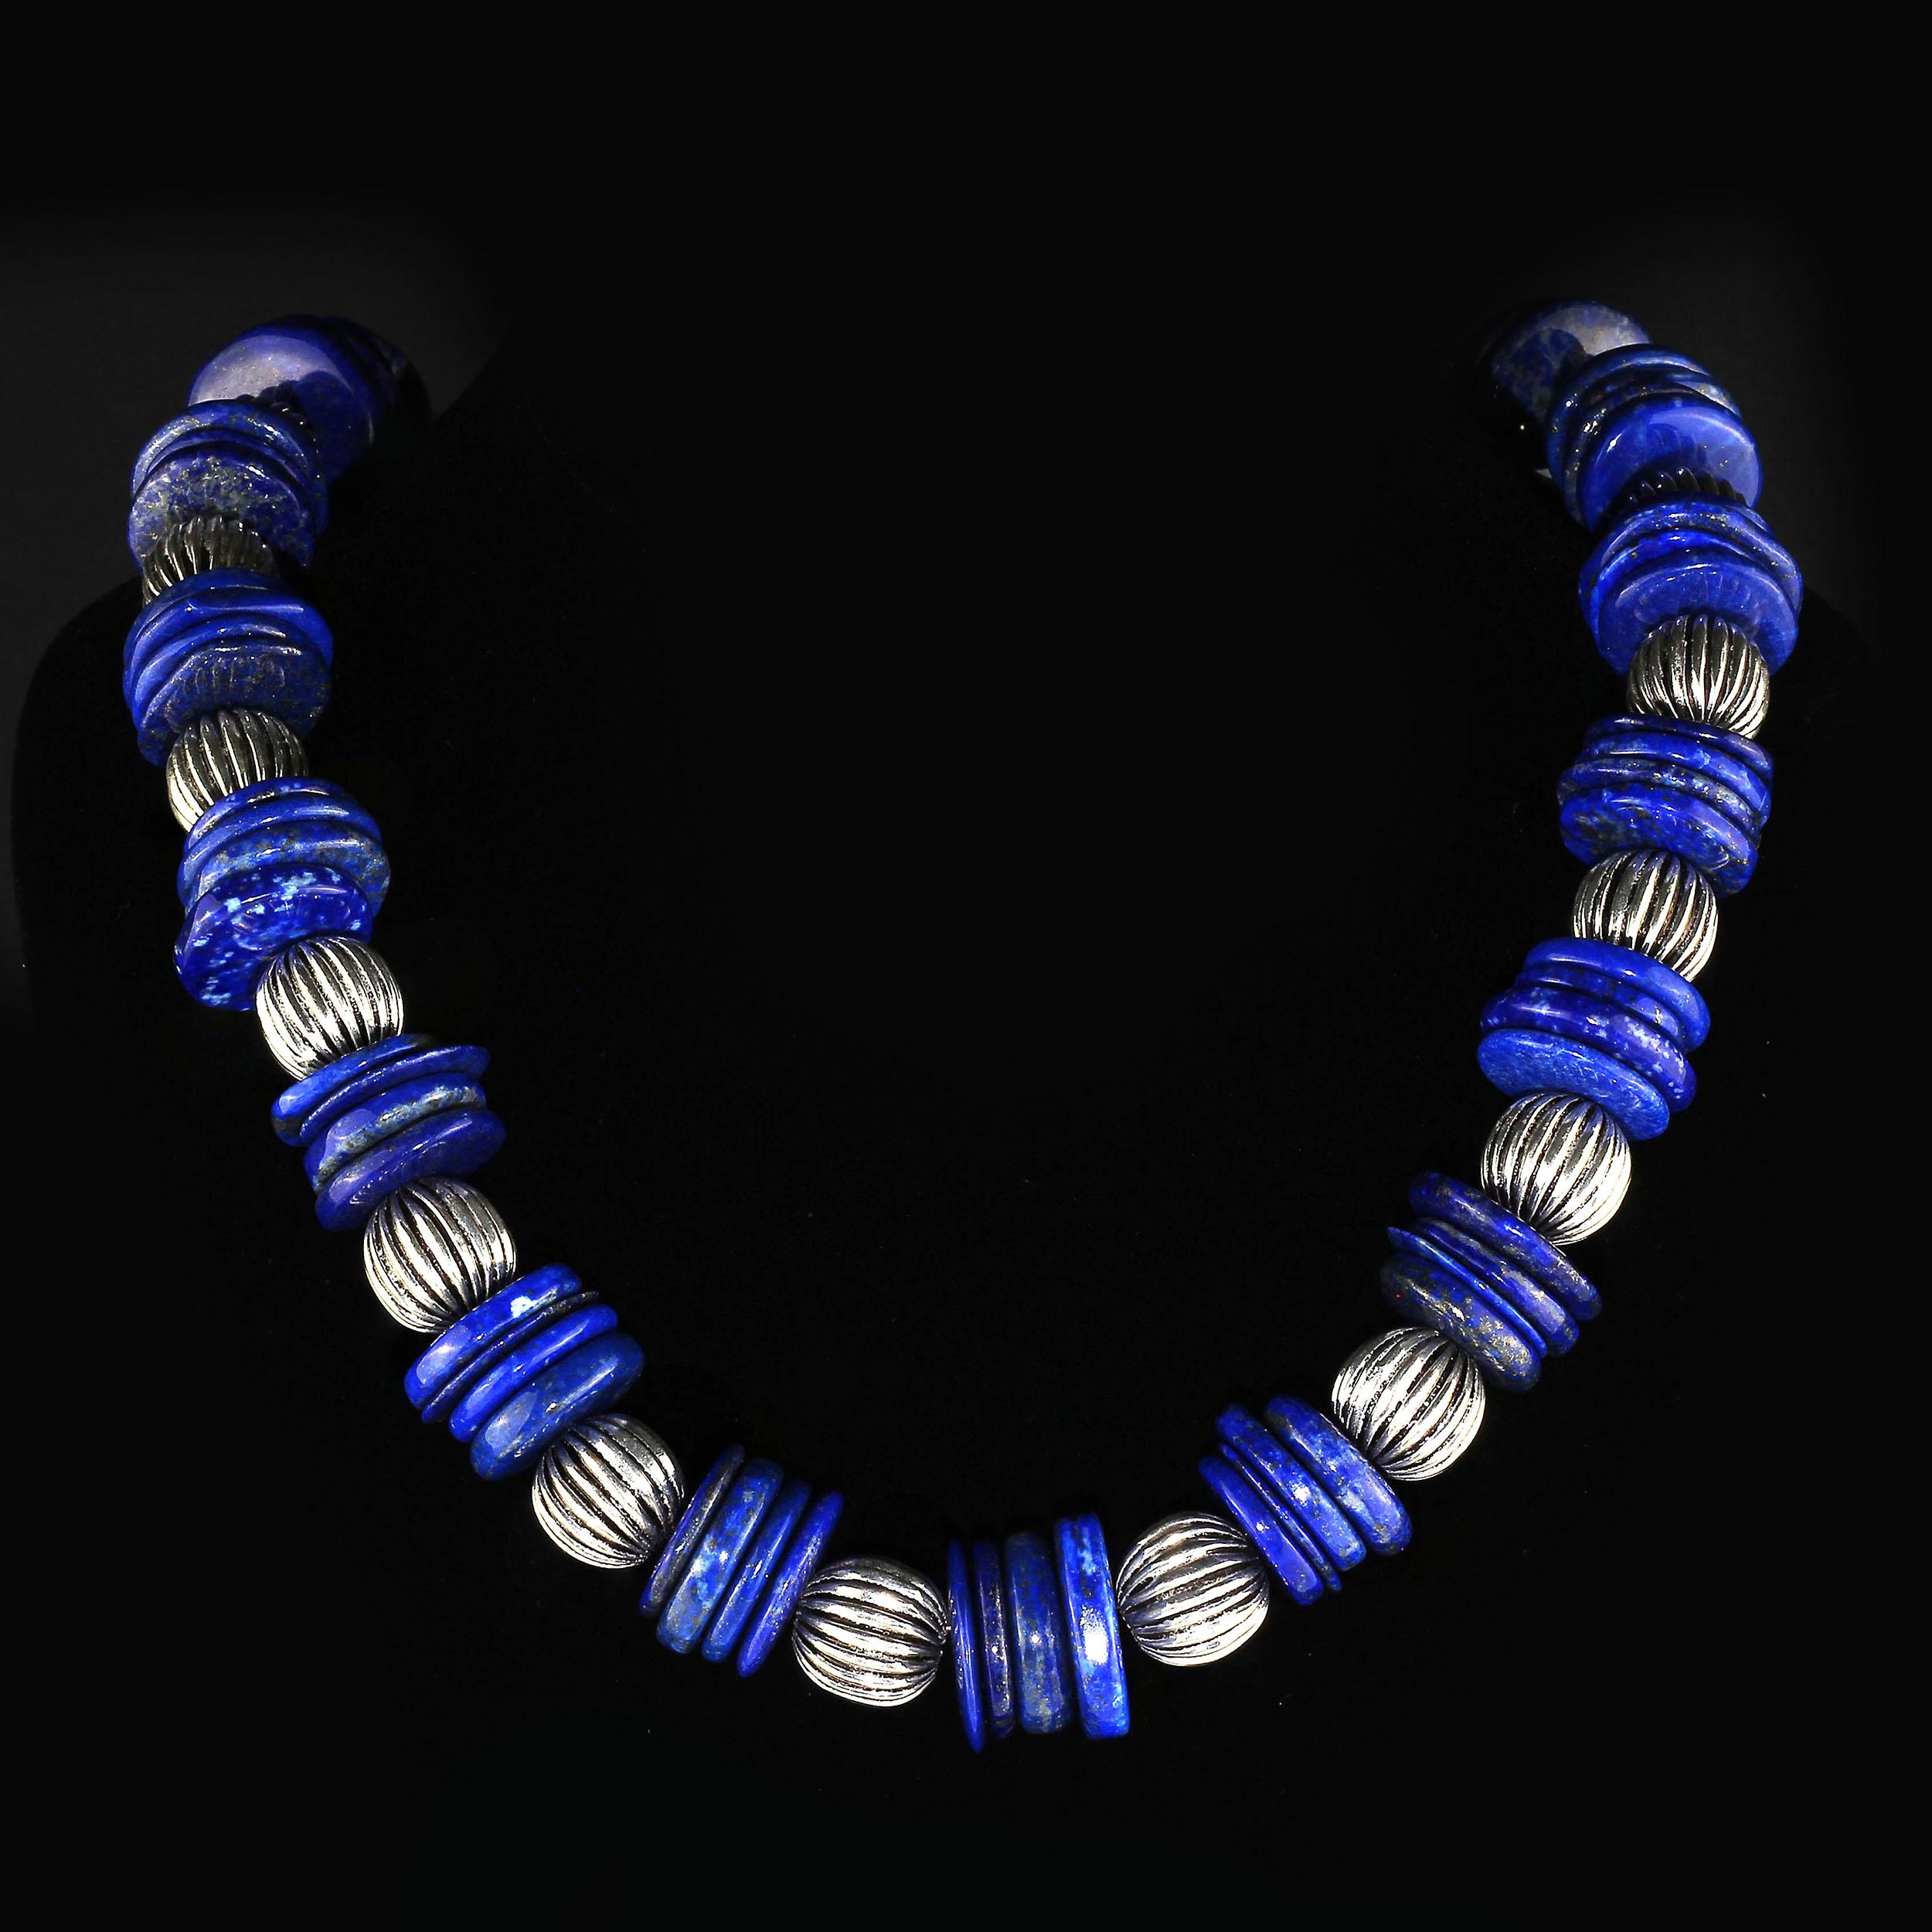 Bead AJD Necklace of Blue Lapis Lazuli Slices with Ribbed Silver Accents